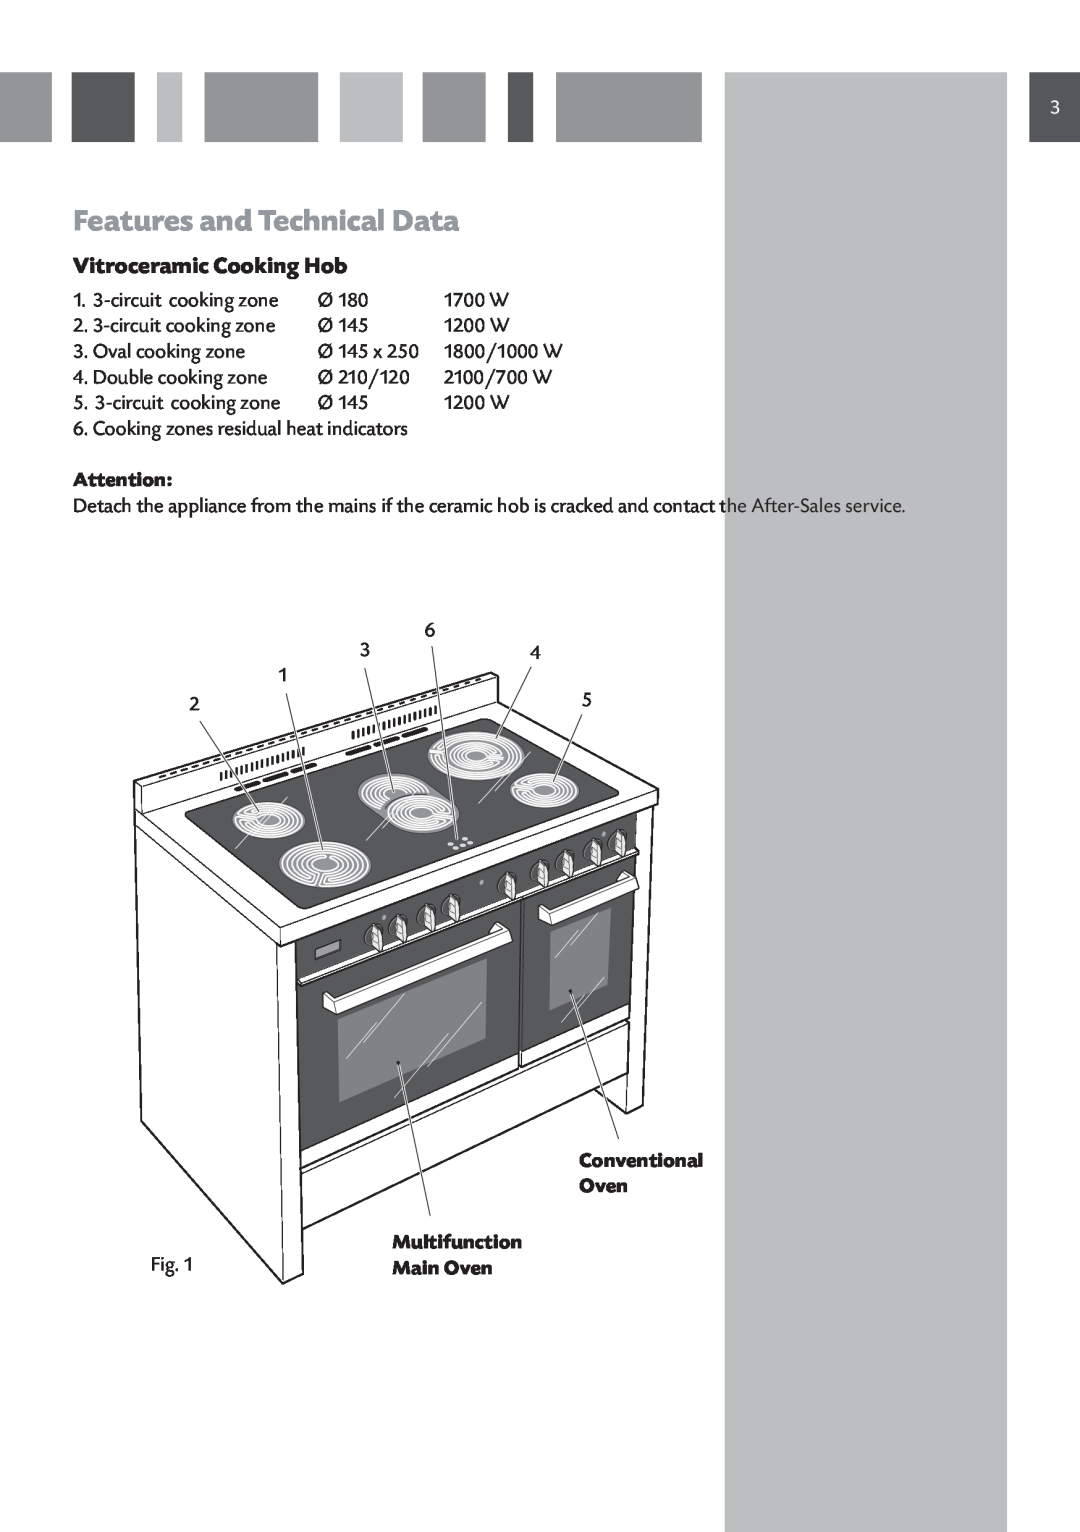 CDA RV 1060 manual Features and Technical Data, Vitroceramic Cooking Hob 